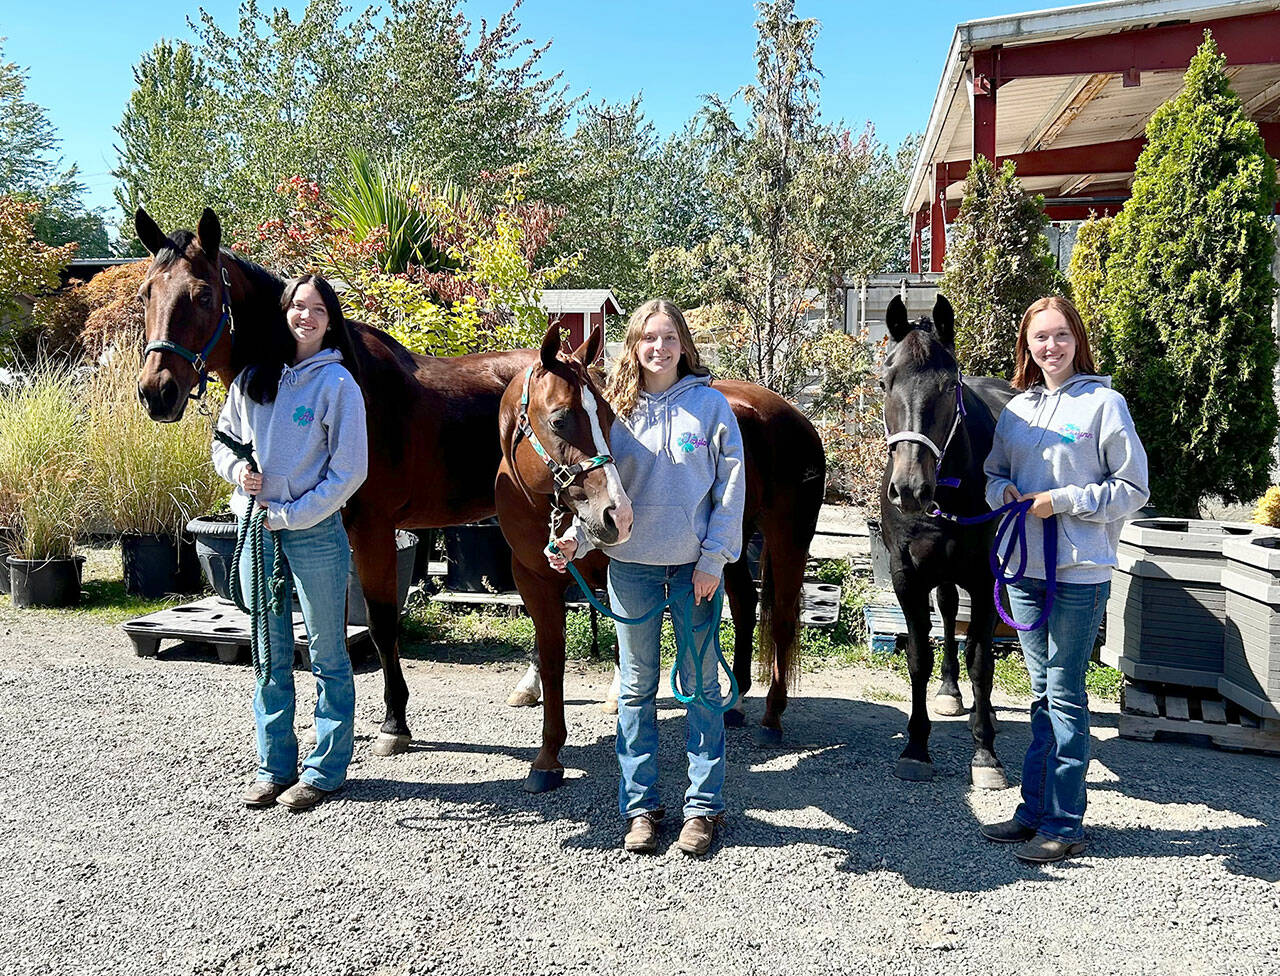 Counties from across the state send their top exhibitors in the intermediate and senior divisions to compete at the Washington State Fair in Puyallup during September. Pictured are Clallam County’s 4-H members Ava Hairell and Banjo, left, Taylor Maughan with Ru and Katelynn Sharpe with Sophie. (photo by Katie Newton)